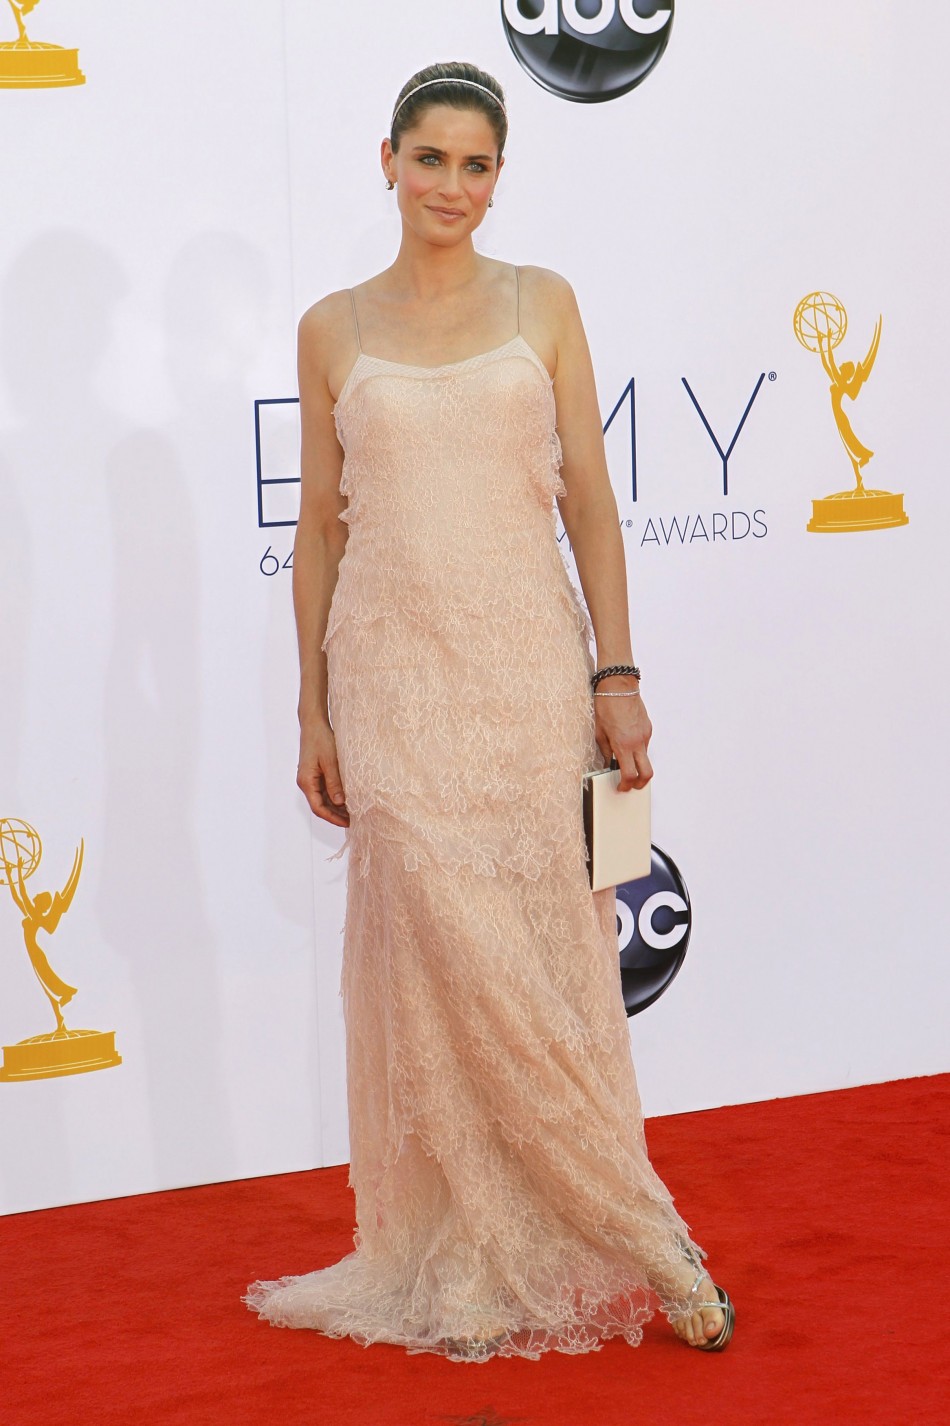 Actress Amanda Peet arrives at the 64th Primetime Emmy Awards in Los Angeles